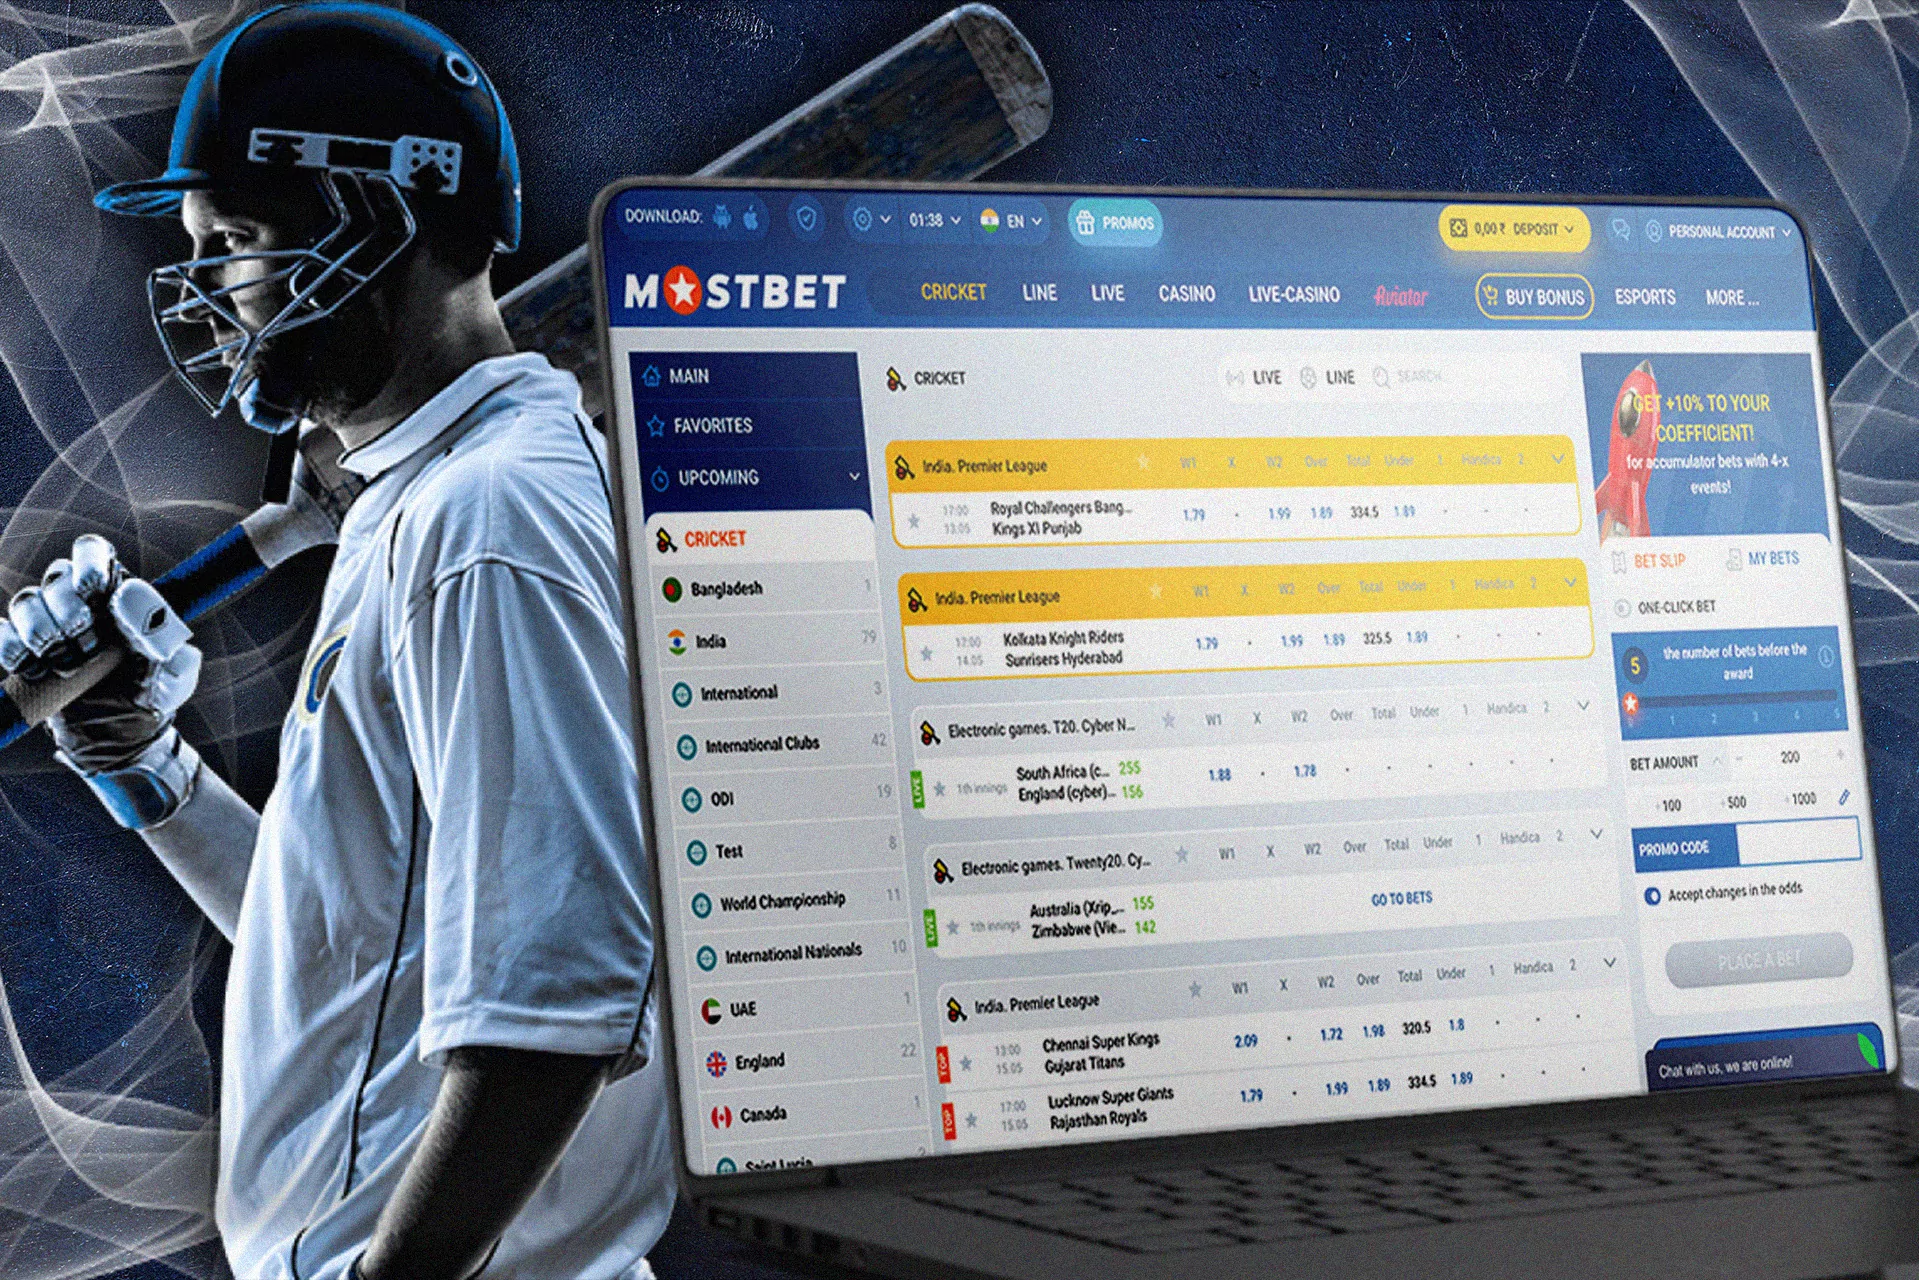 Place bets on cricket at Mostbet.